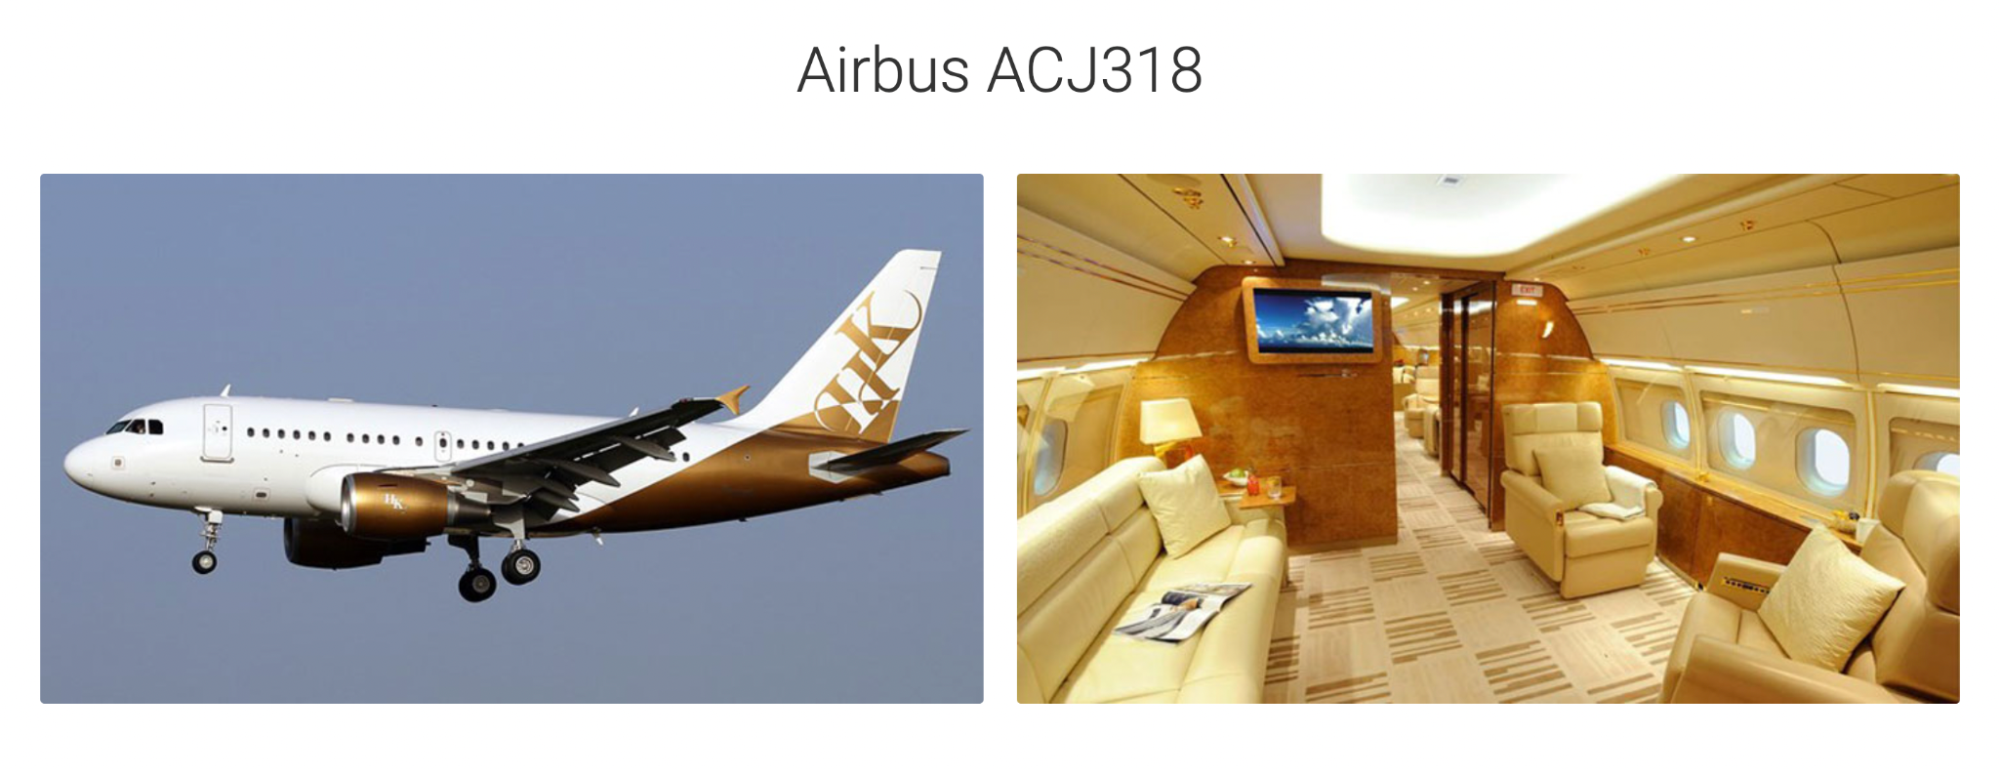 An image showing the exterior and interior of the VIP airliner Airbus ACJ318.